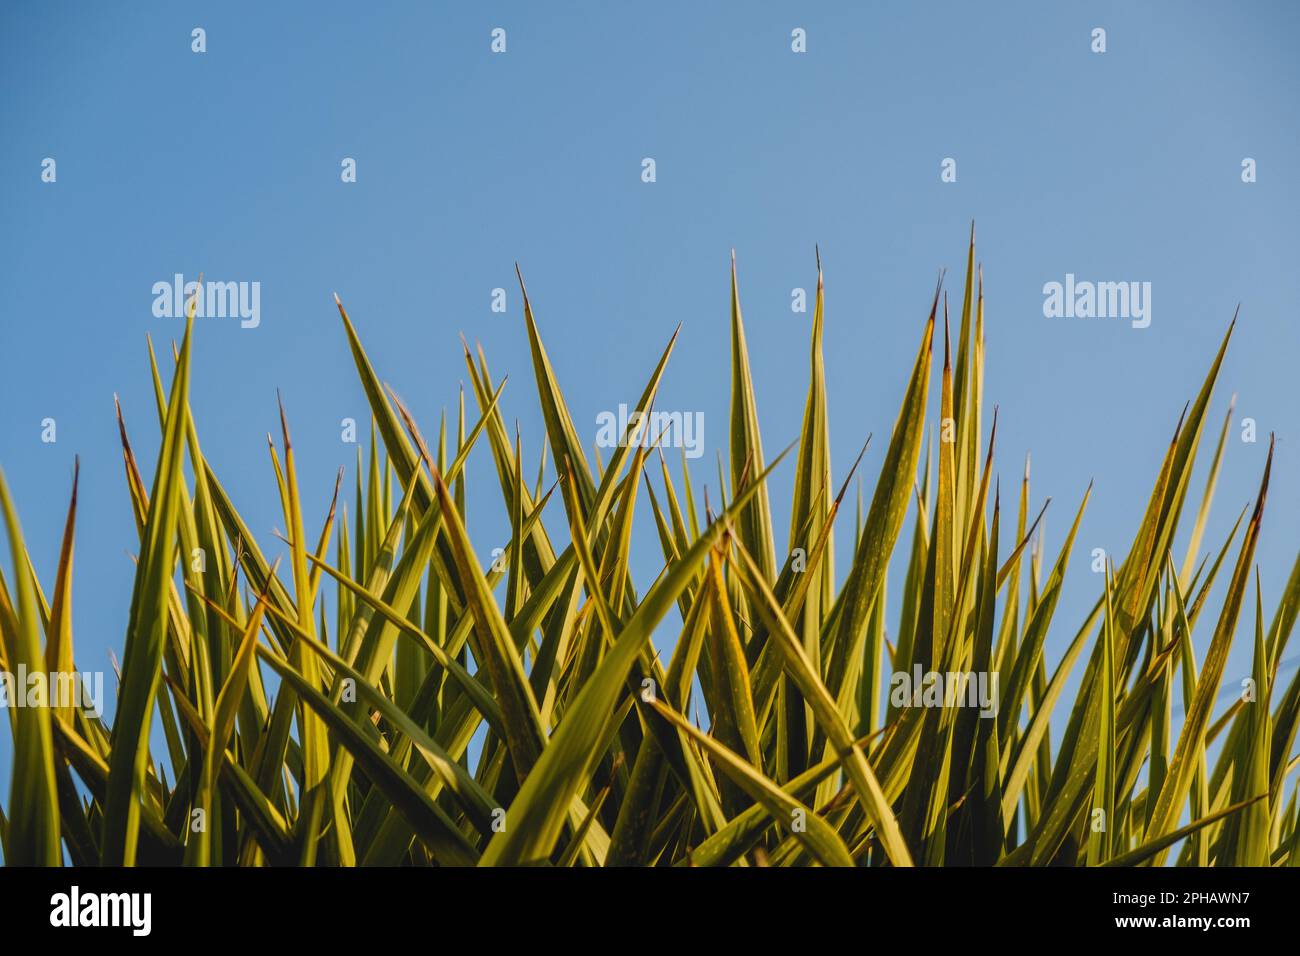 Spikey yucca plant against a blue sky Stock Photo